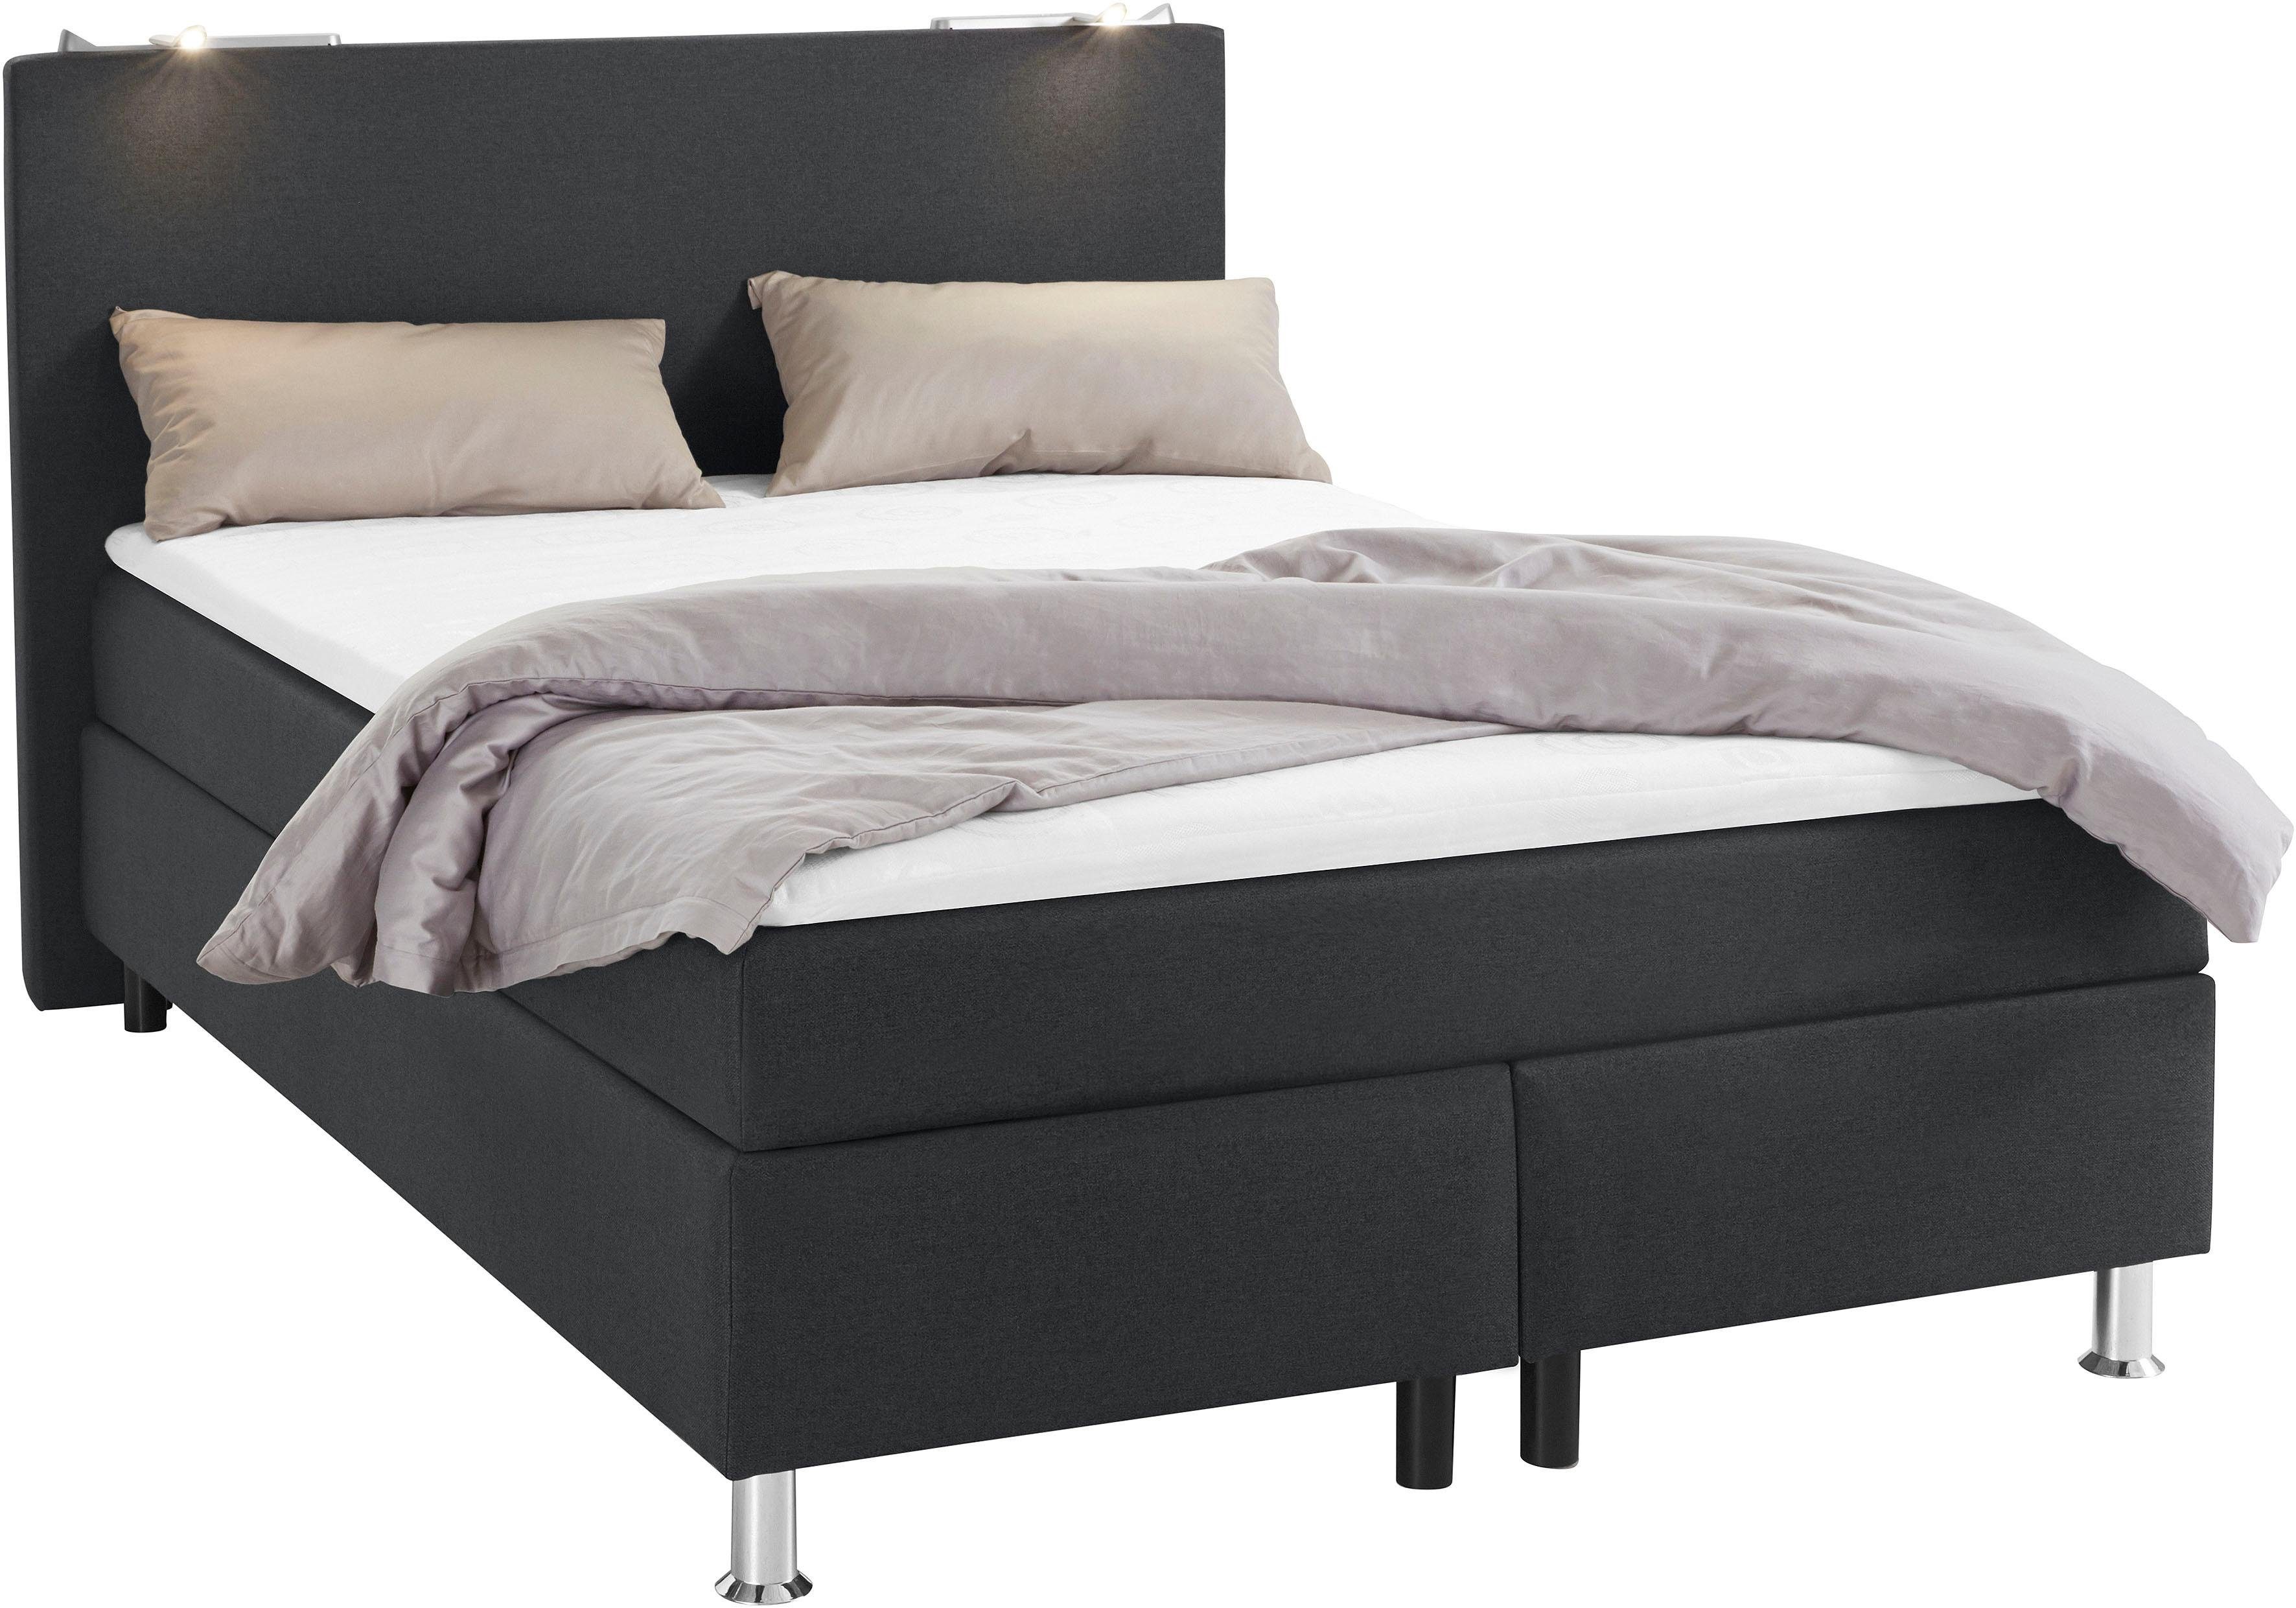 COLLECTION AB Boxspringbett, inkl. LED-Beleuchtung und Topper-Otto